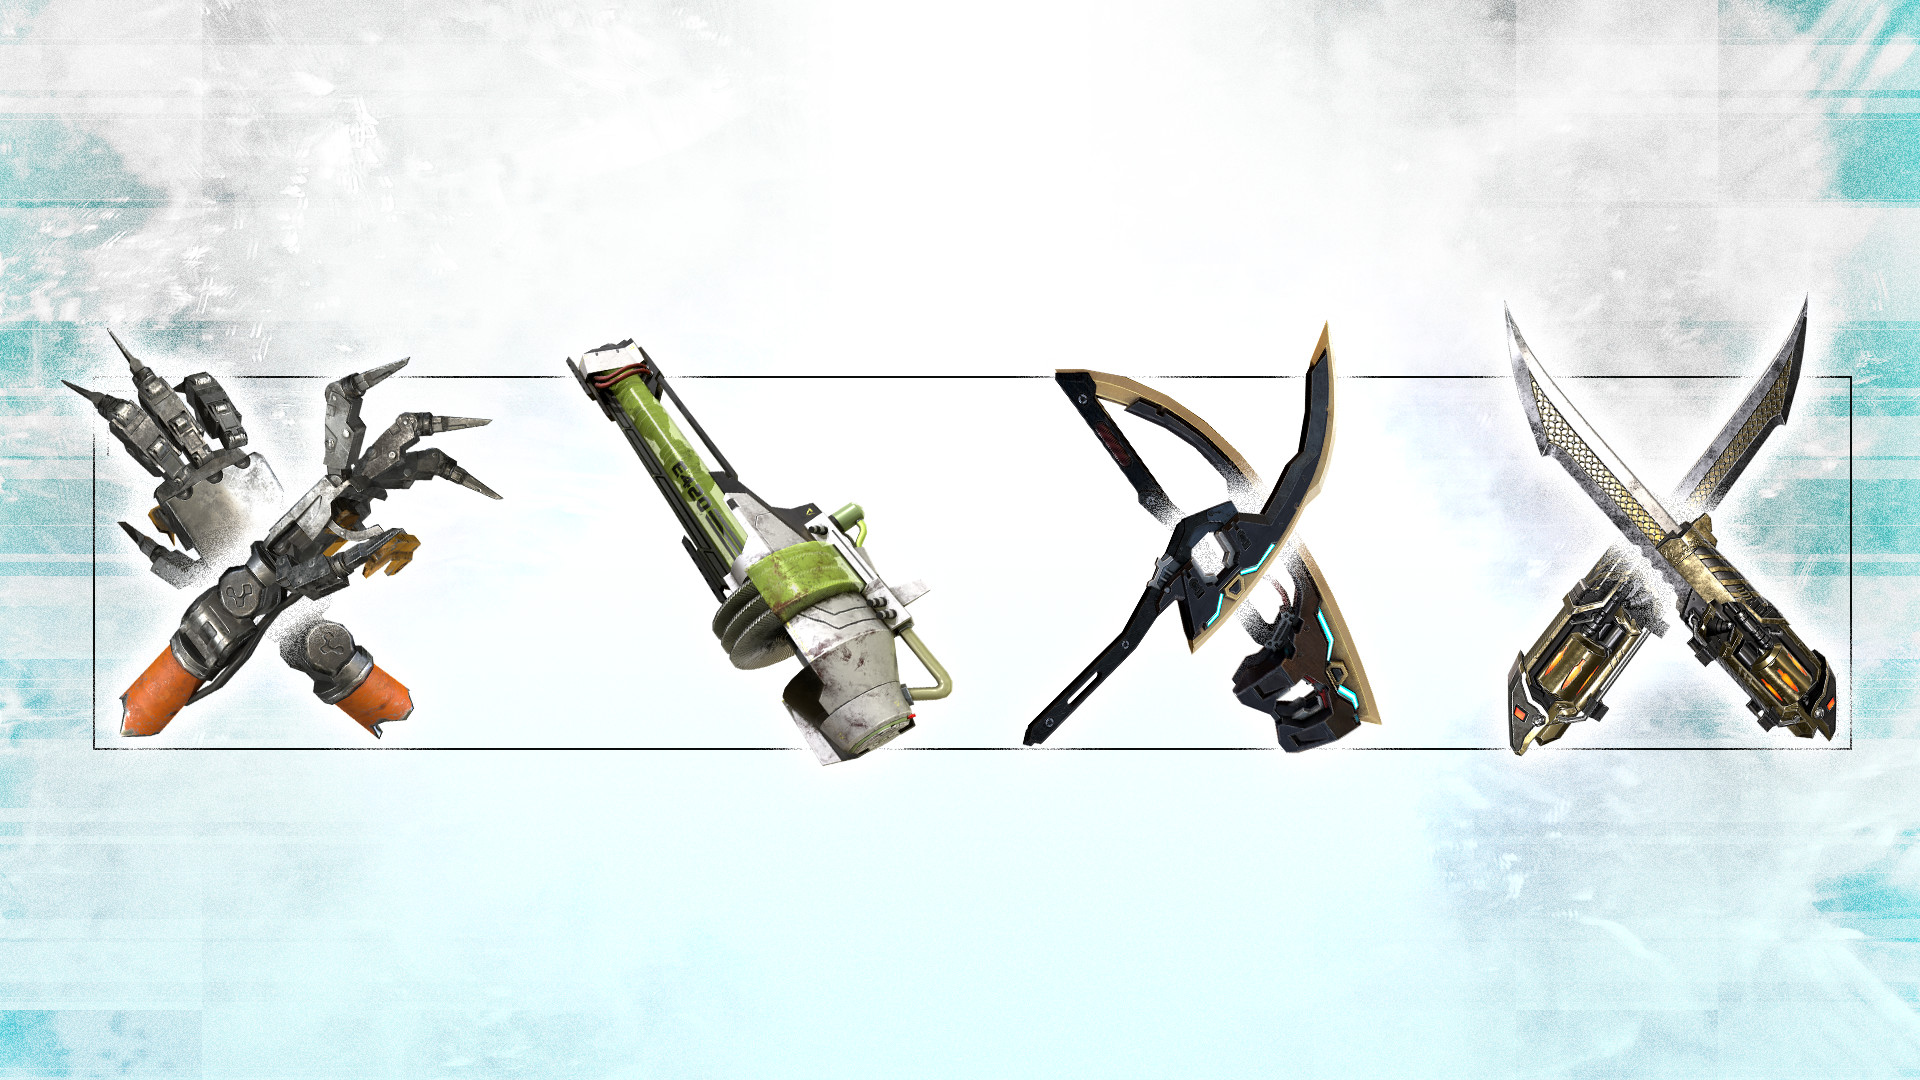 The Surge 2 - Future Shock Weapon Pack Featured Screenshot #1